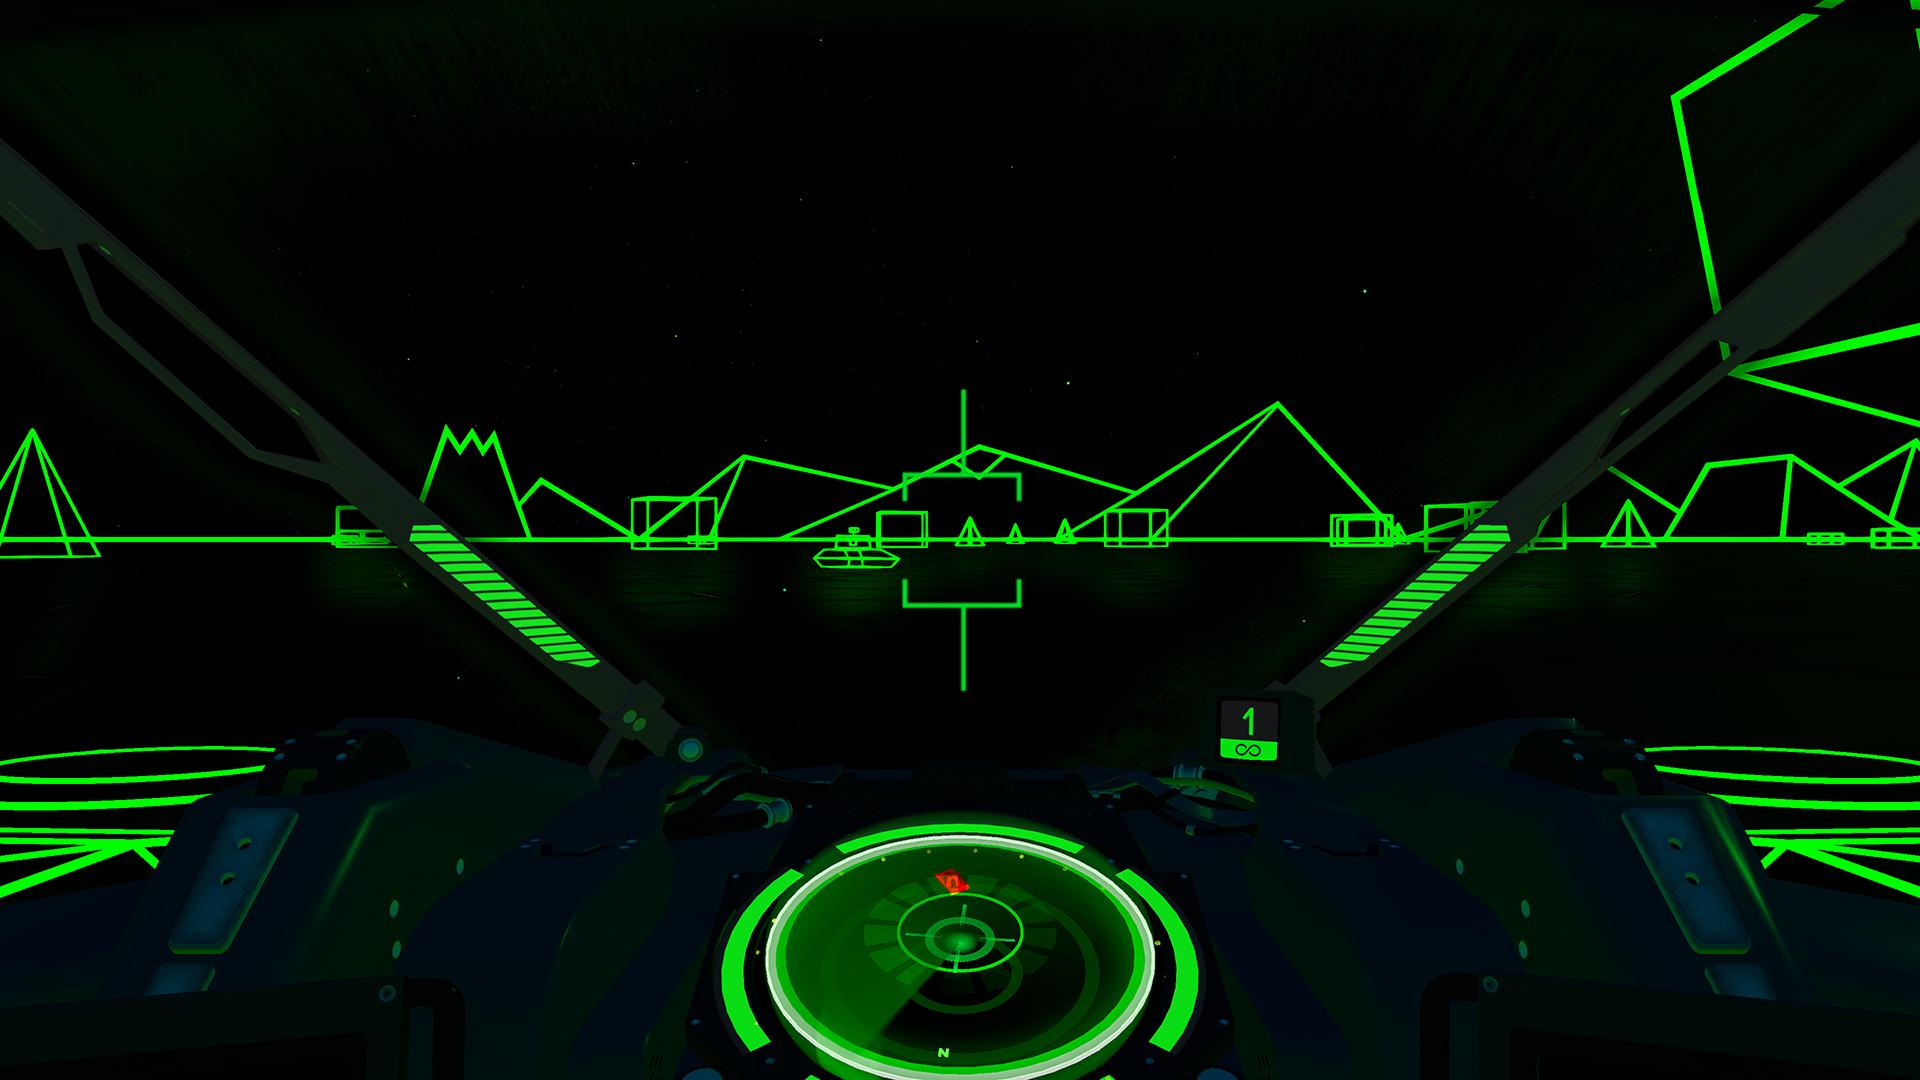 Free download Return to 1980 with Battlezones new retro